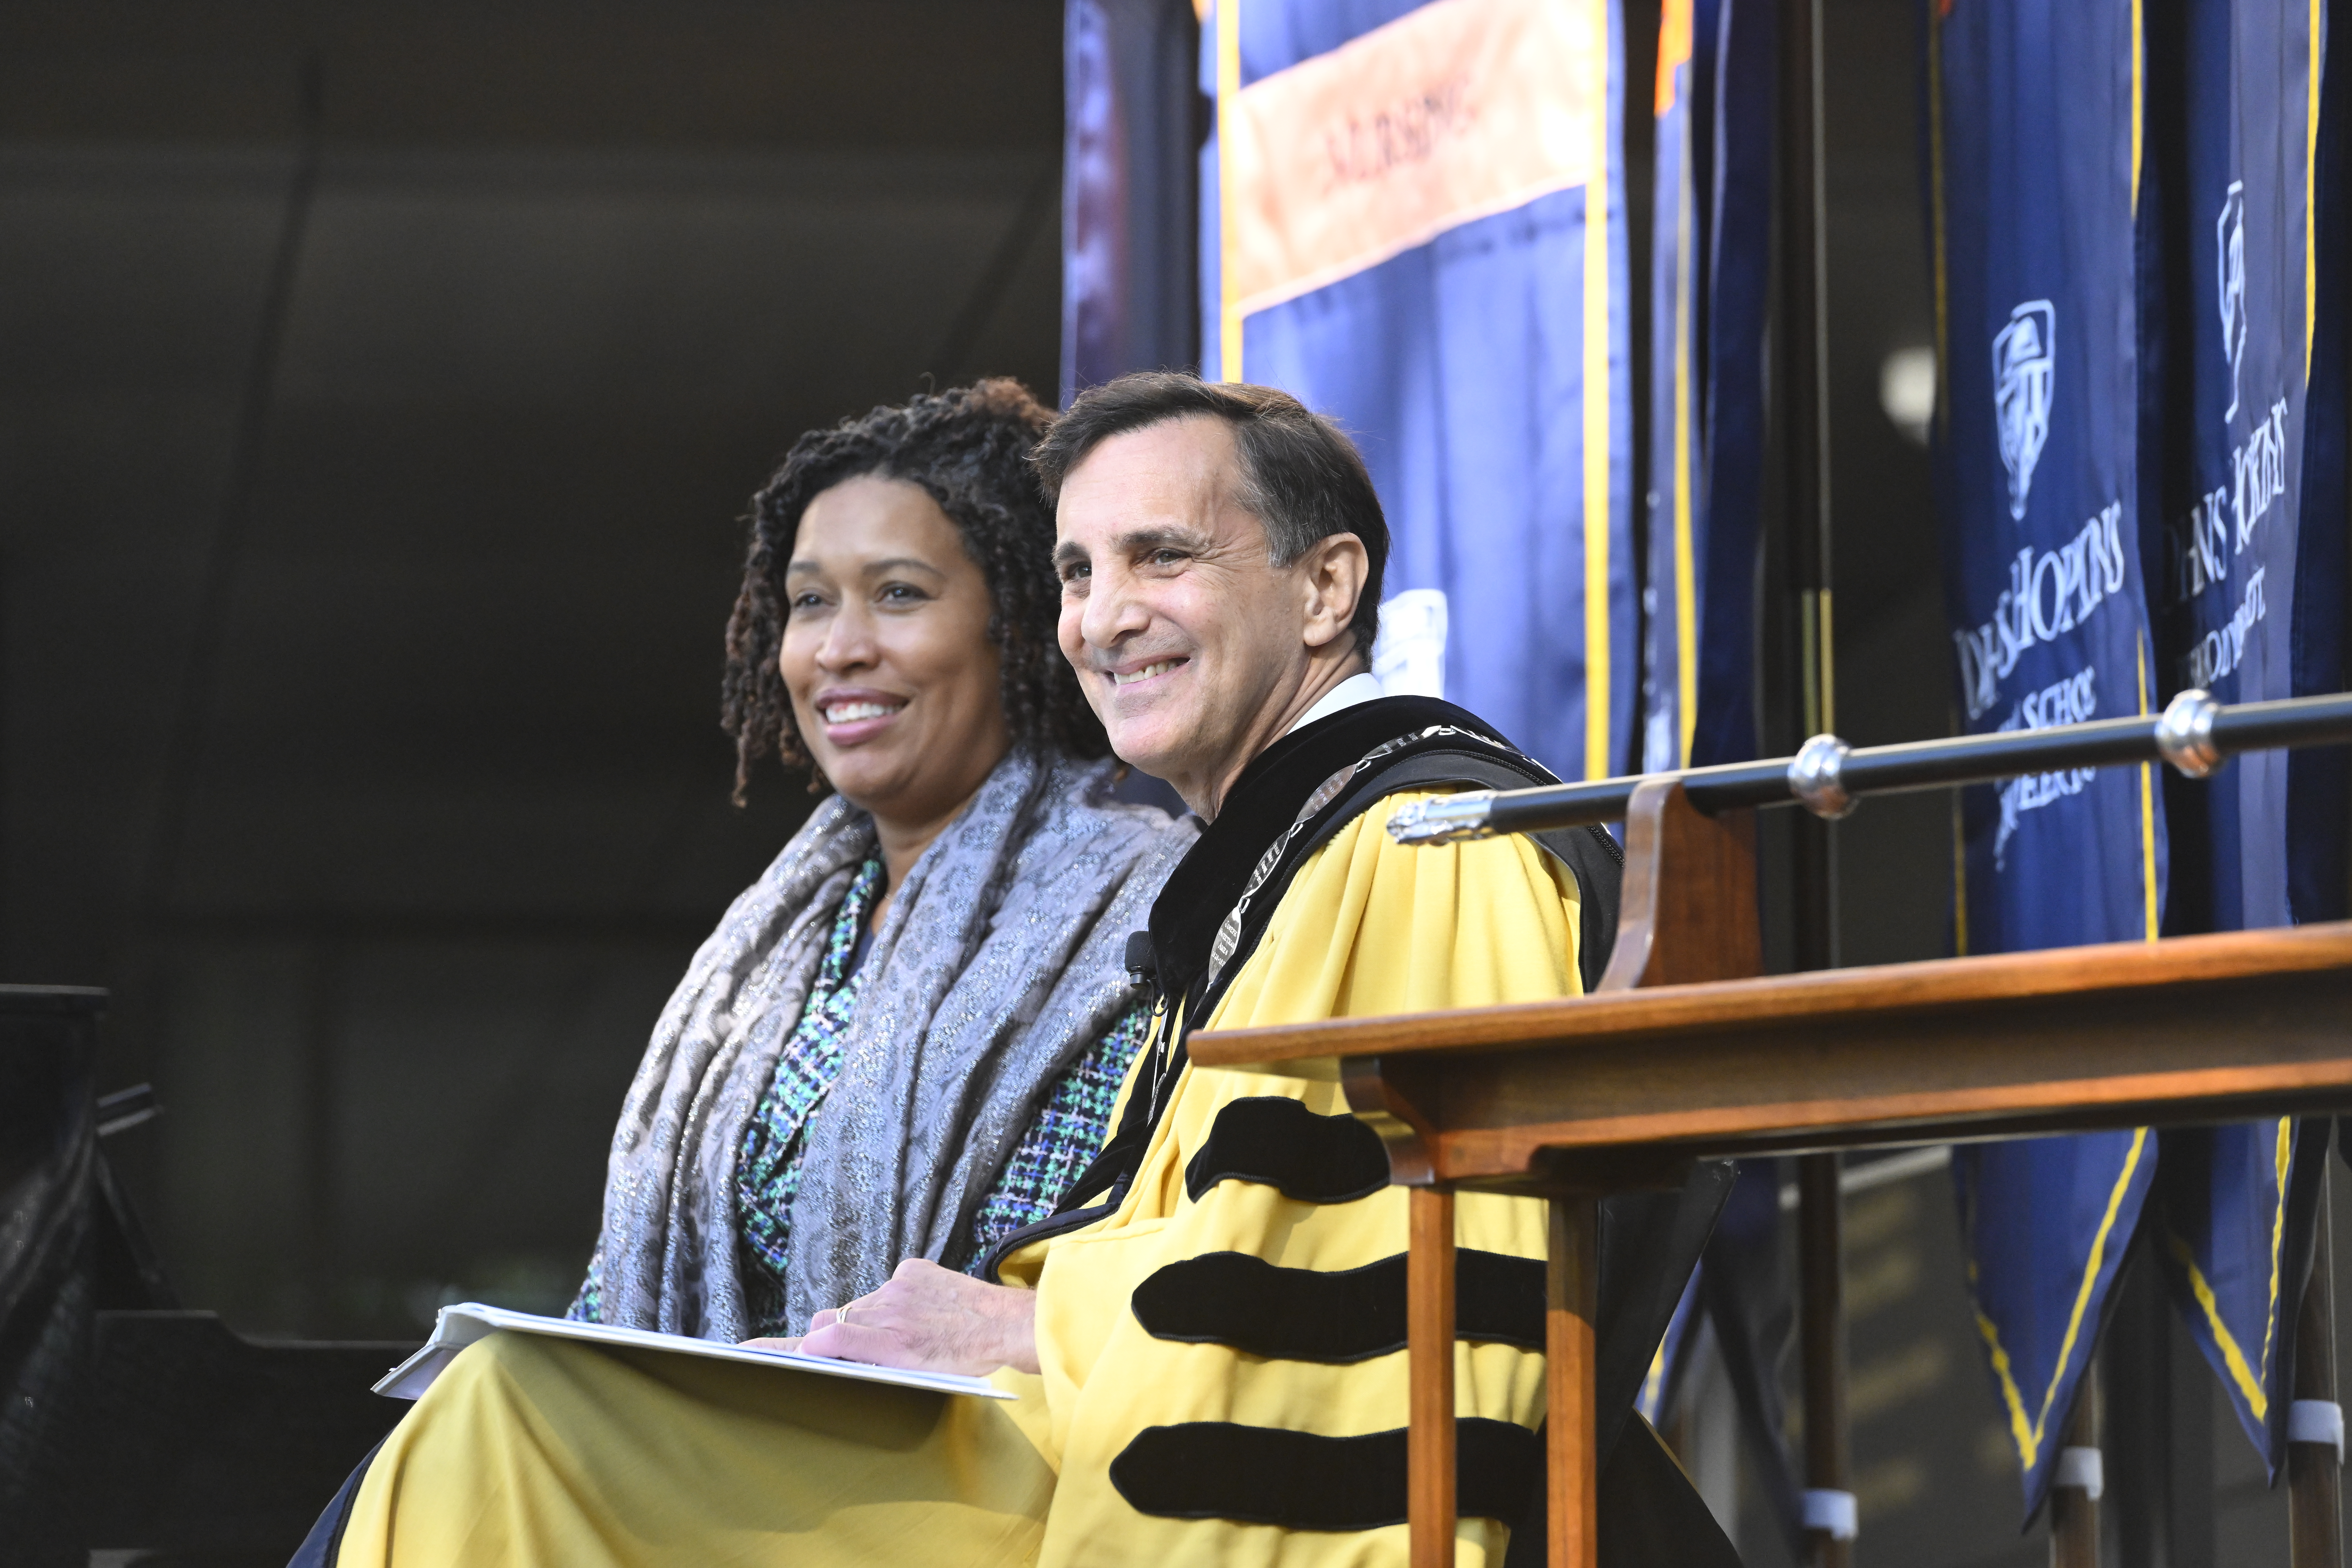 JHU President Ron Daniels and Washington DC Mayor Muriel Bowser smile while sitting next to each other